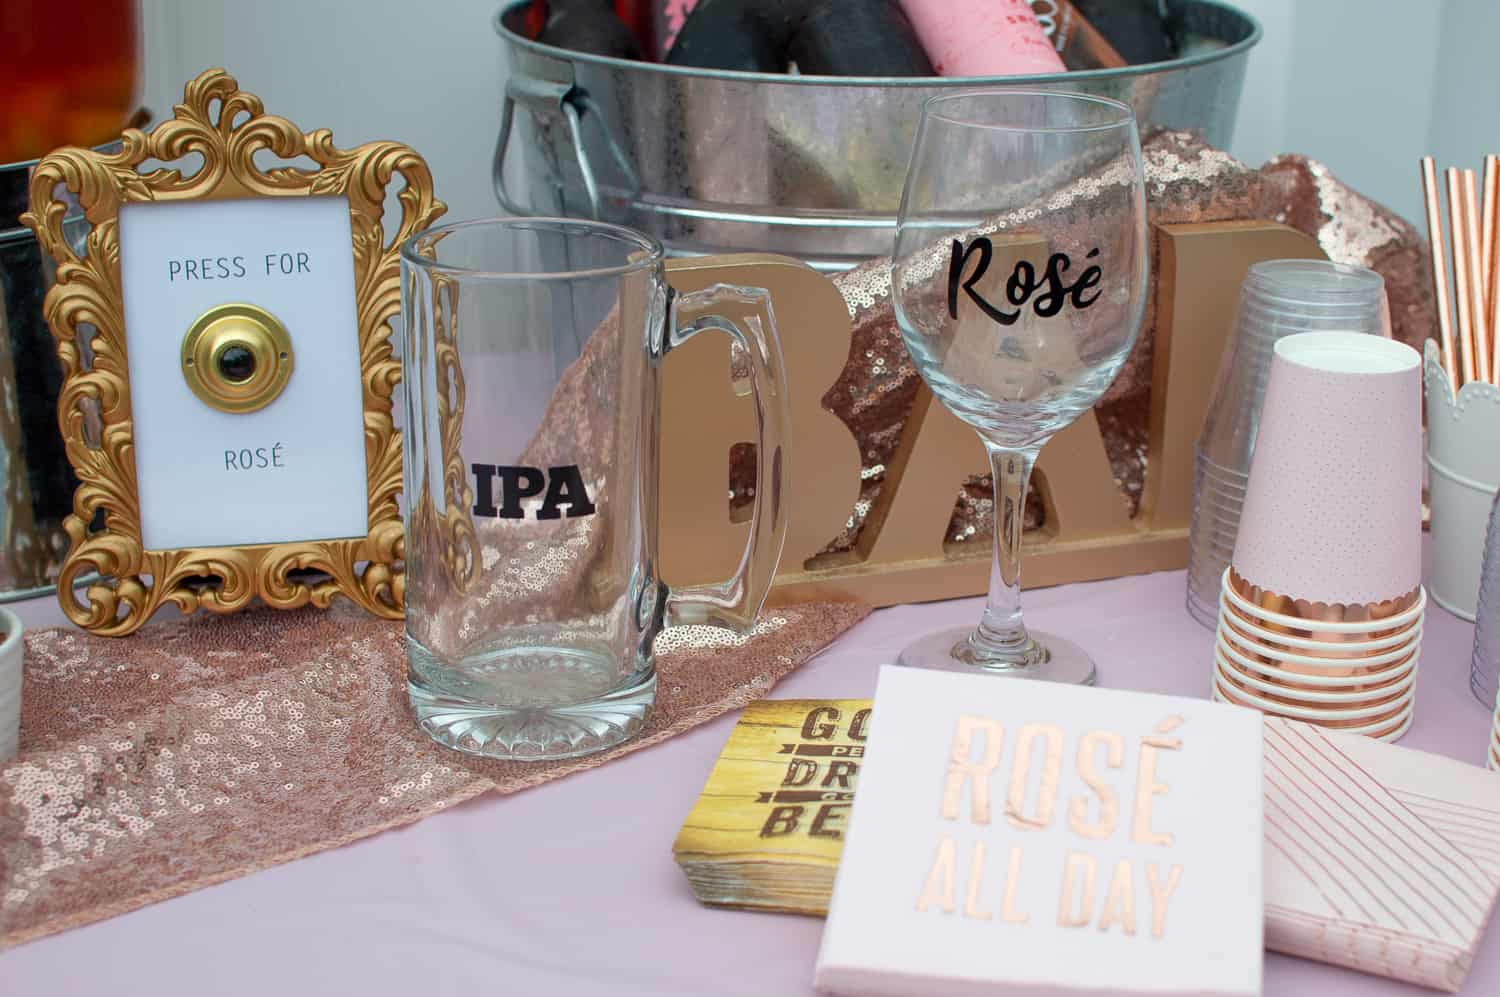 Press for Rosé DIY Party Decor and Bride and Groom Beverage Glasses